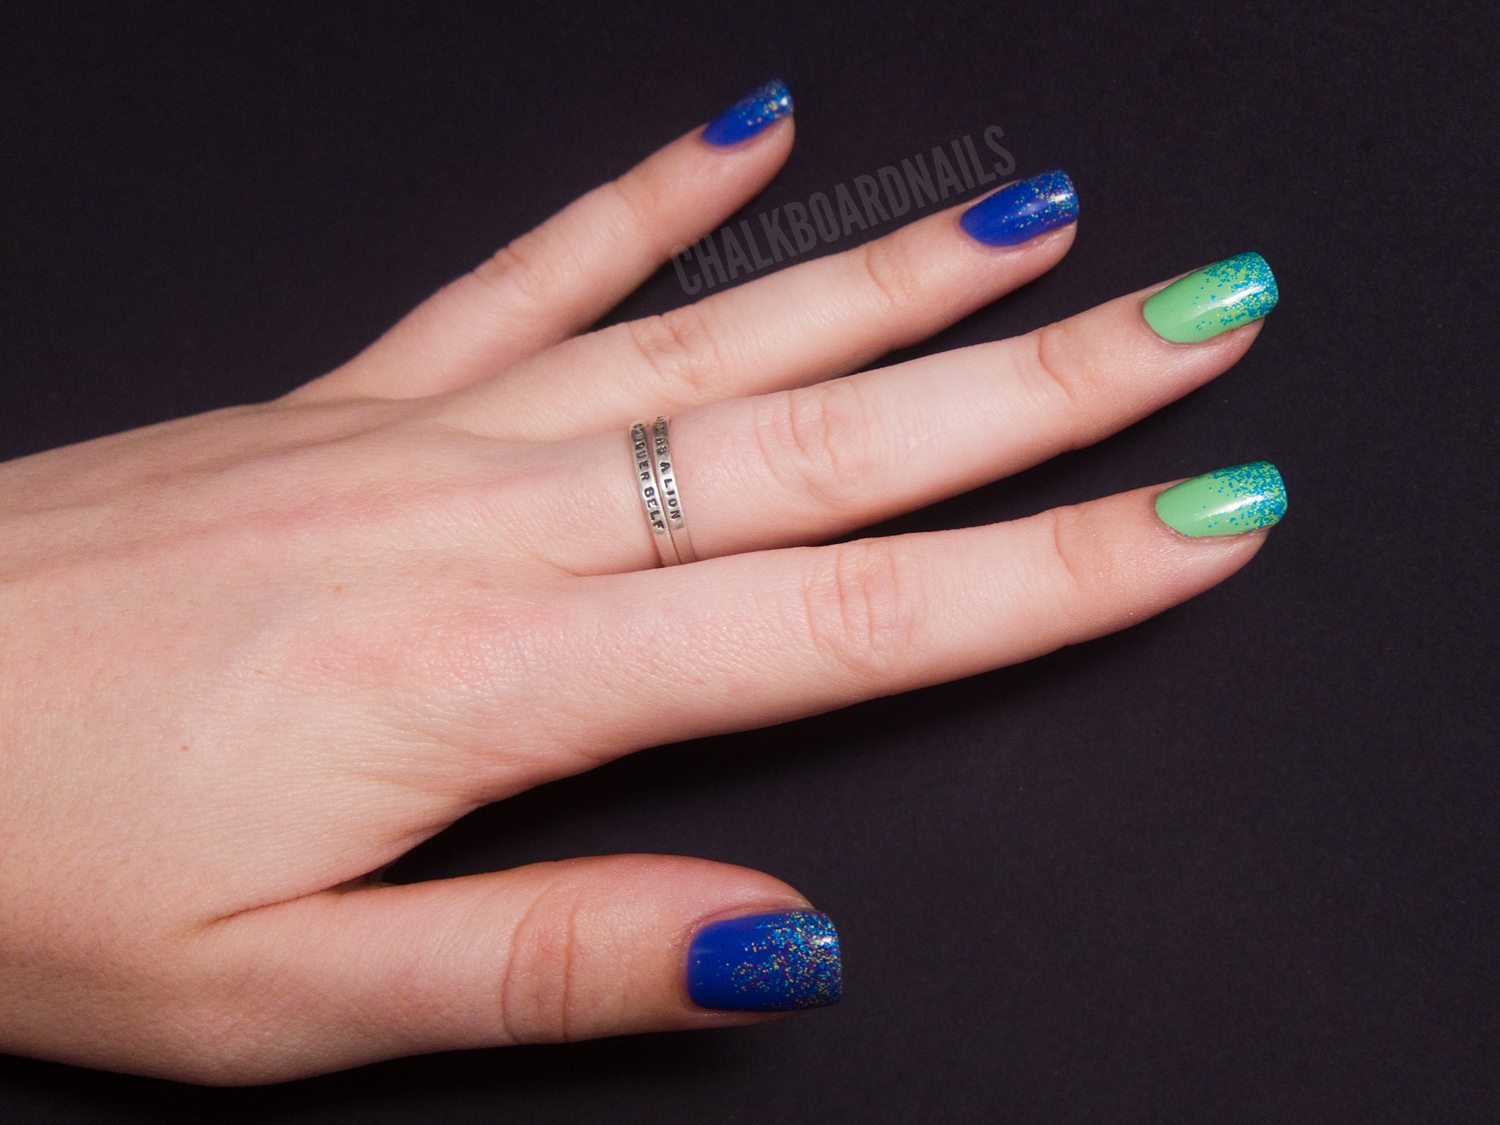 My accent nails are Color Club Twiggie with Nail-venturous Floam gradiented